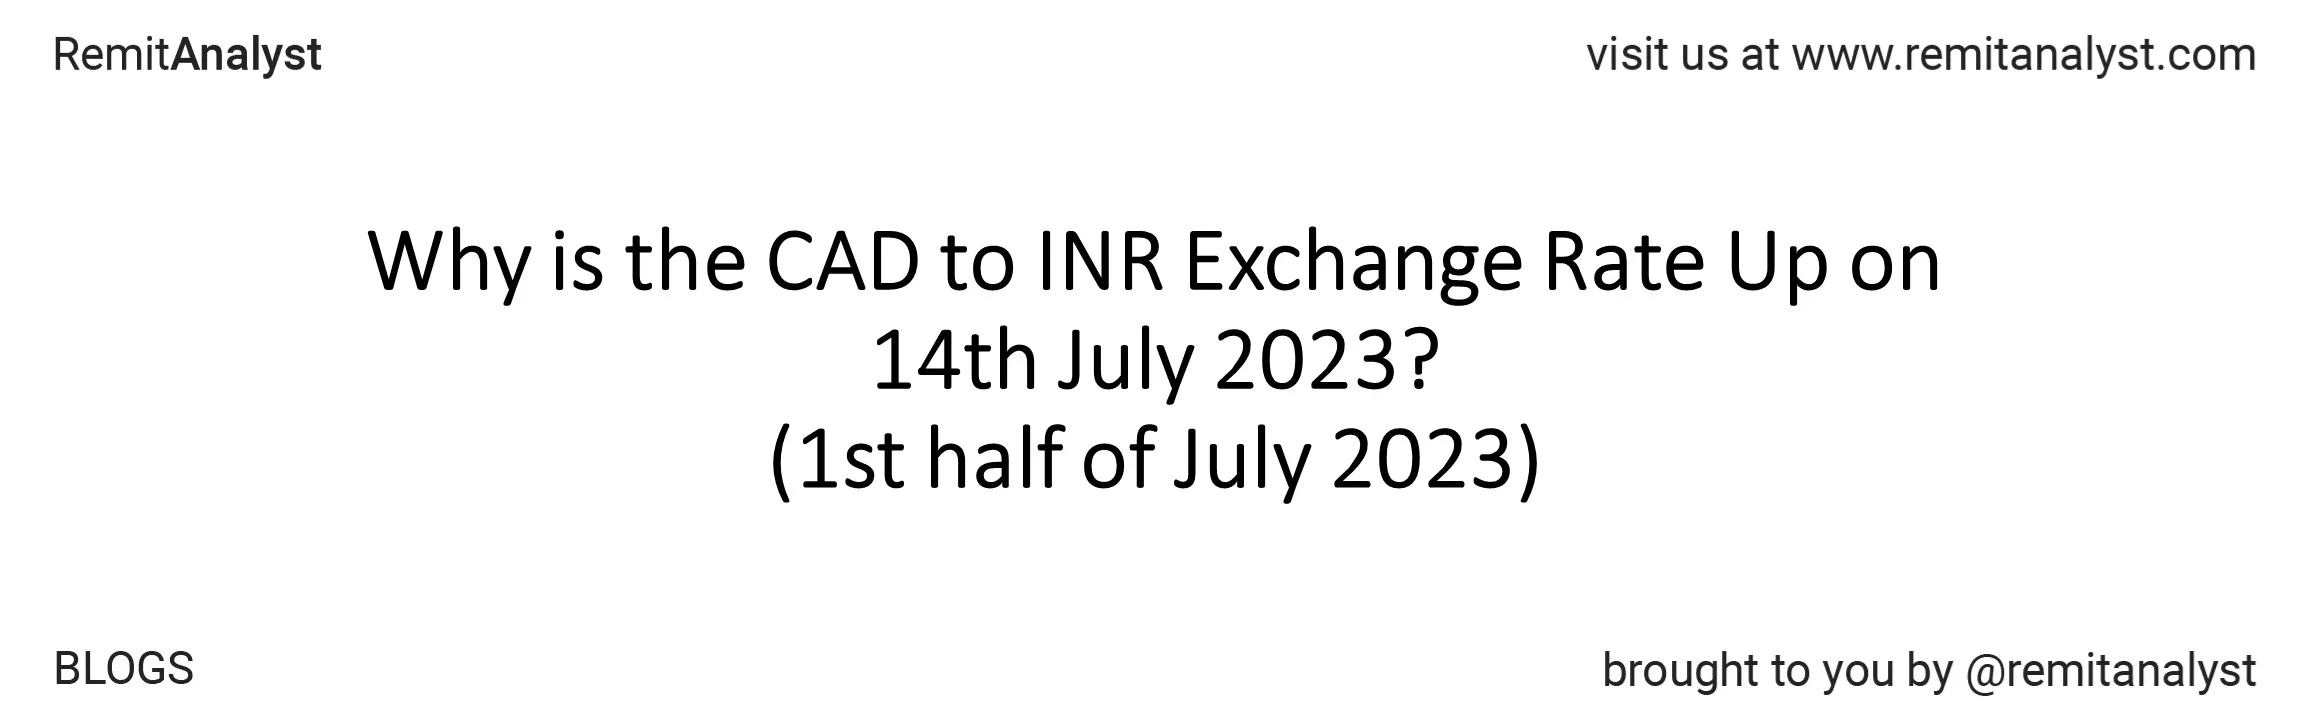 cad-to-inr-exchange-rate-from-3-july-2023-to-14-july-2023-title